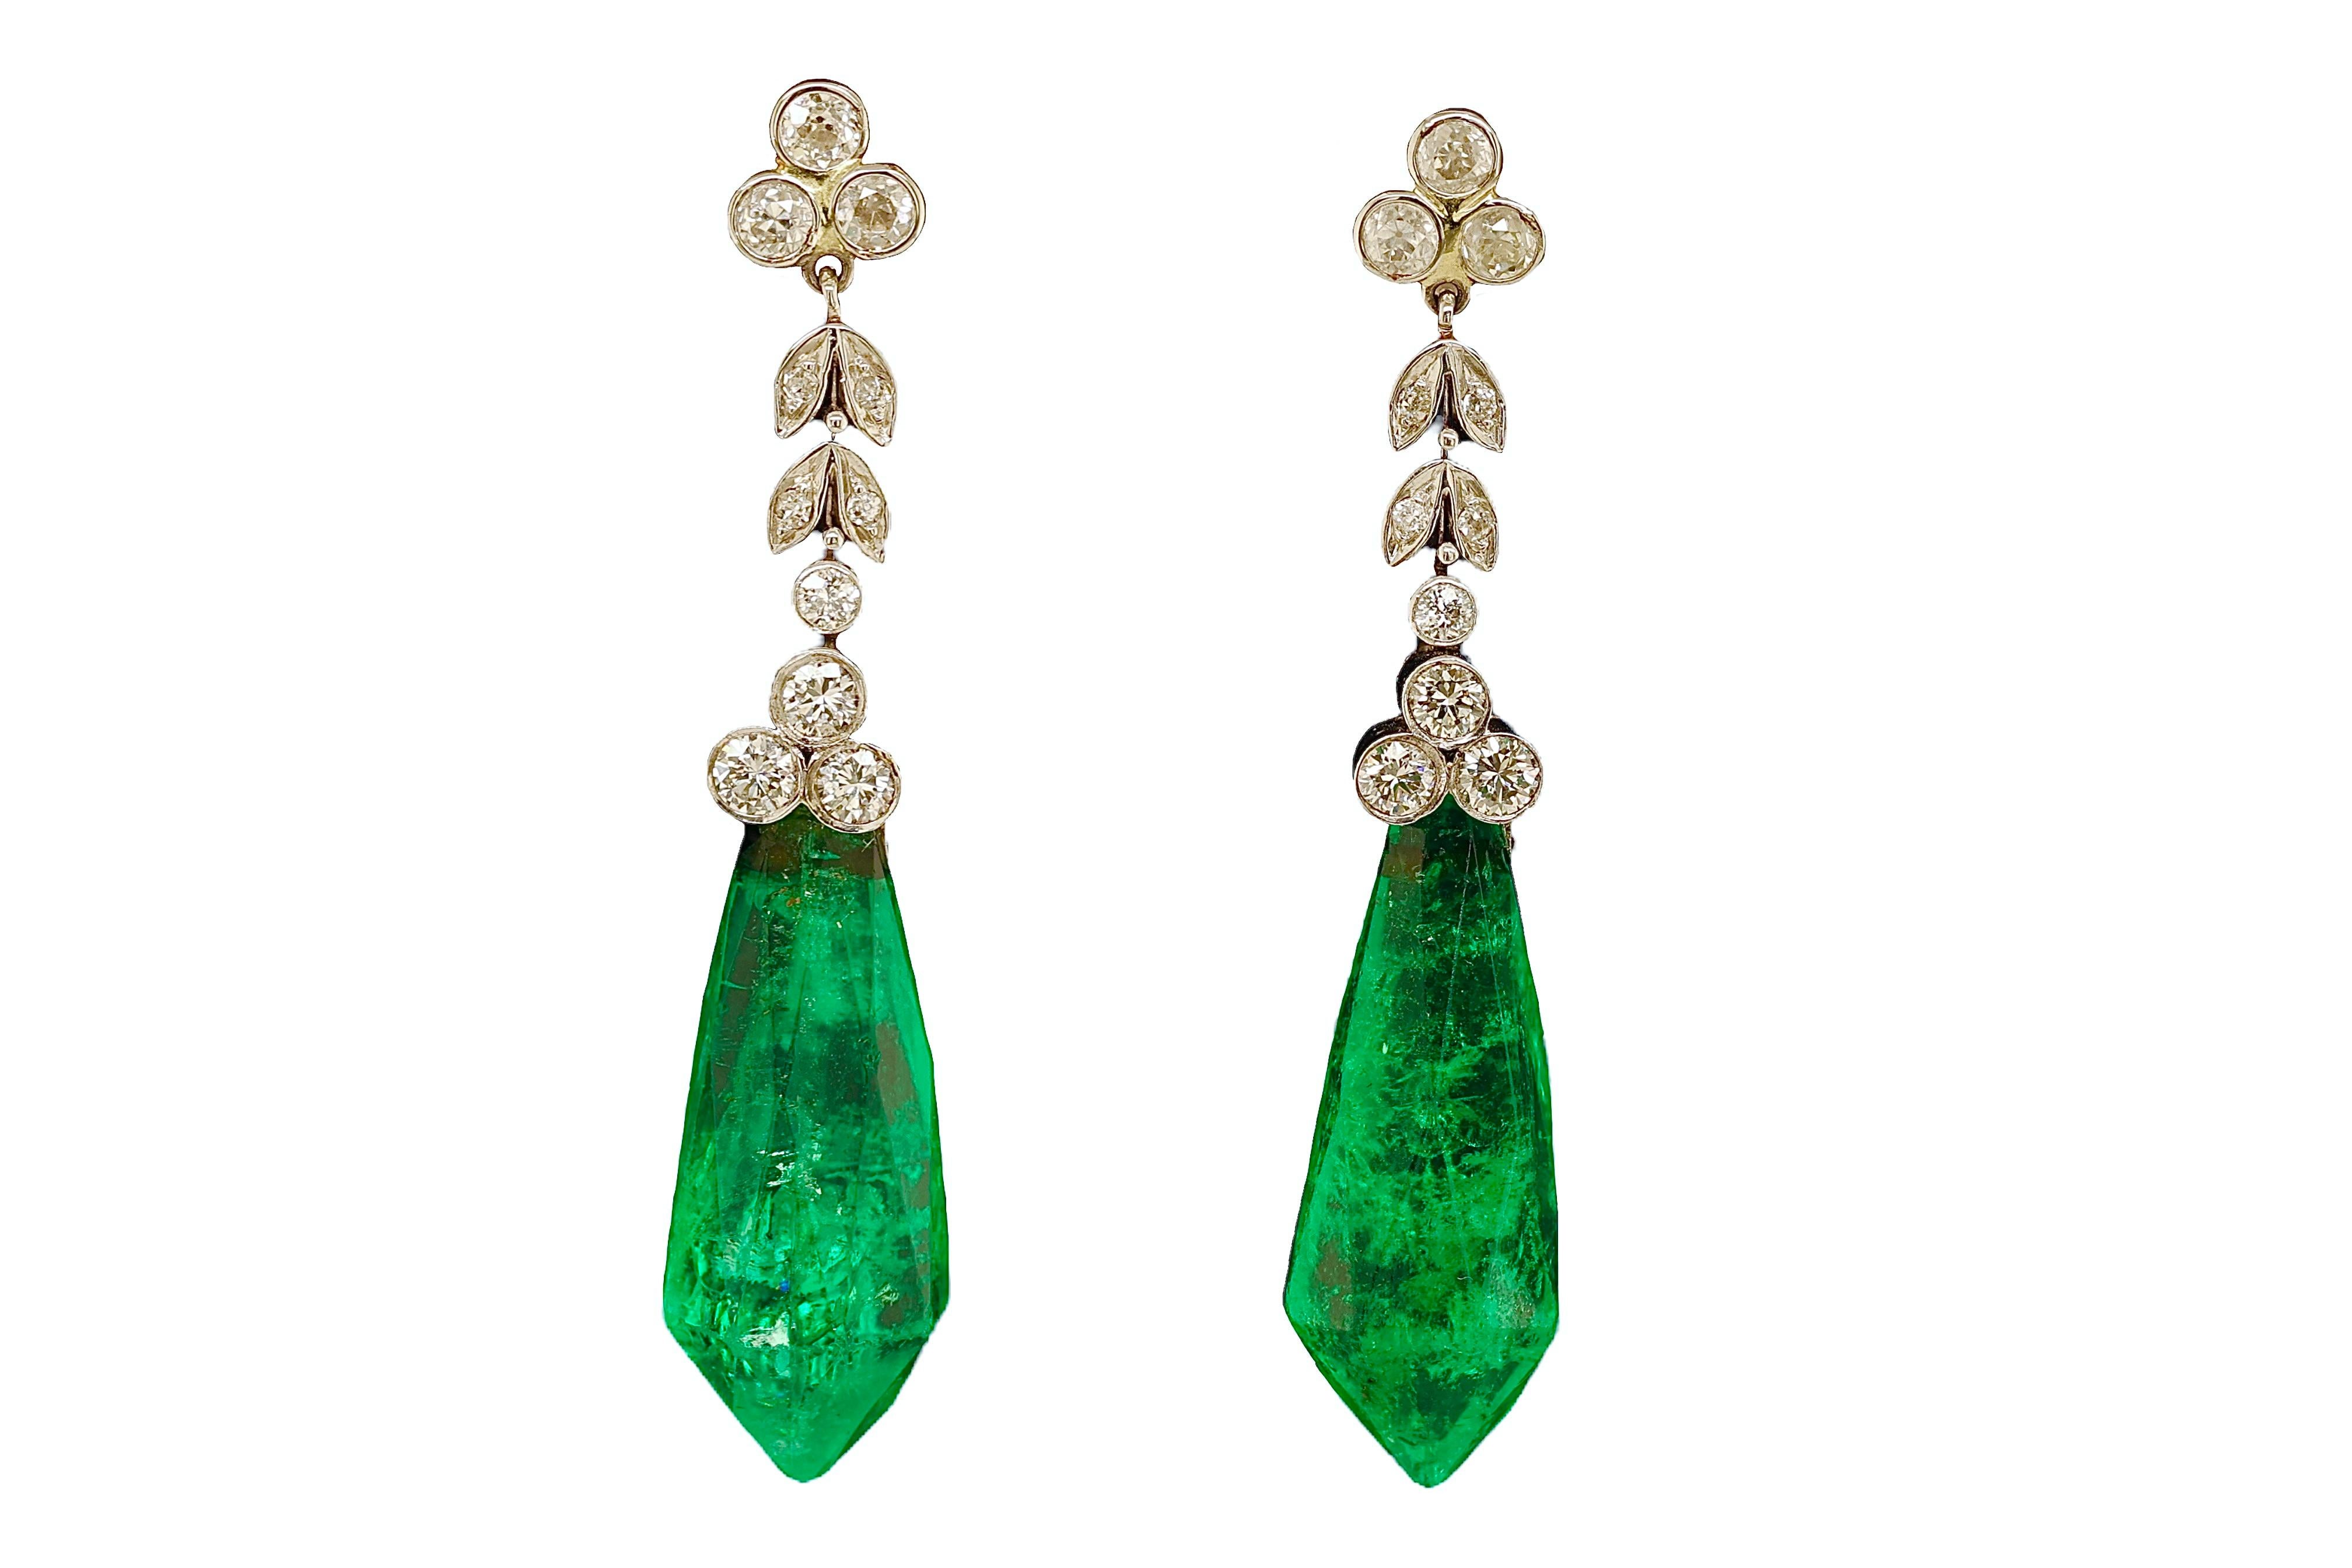 Brilliant Cut 18kt White Gold Dangling Earrings with 32ct Emeralds and 1.46ct Diamonds, Estate For Sale